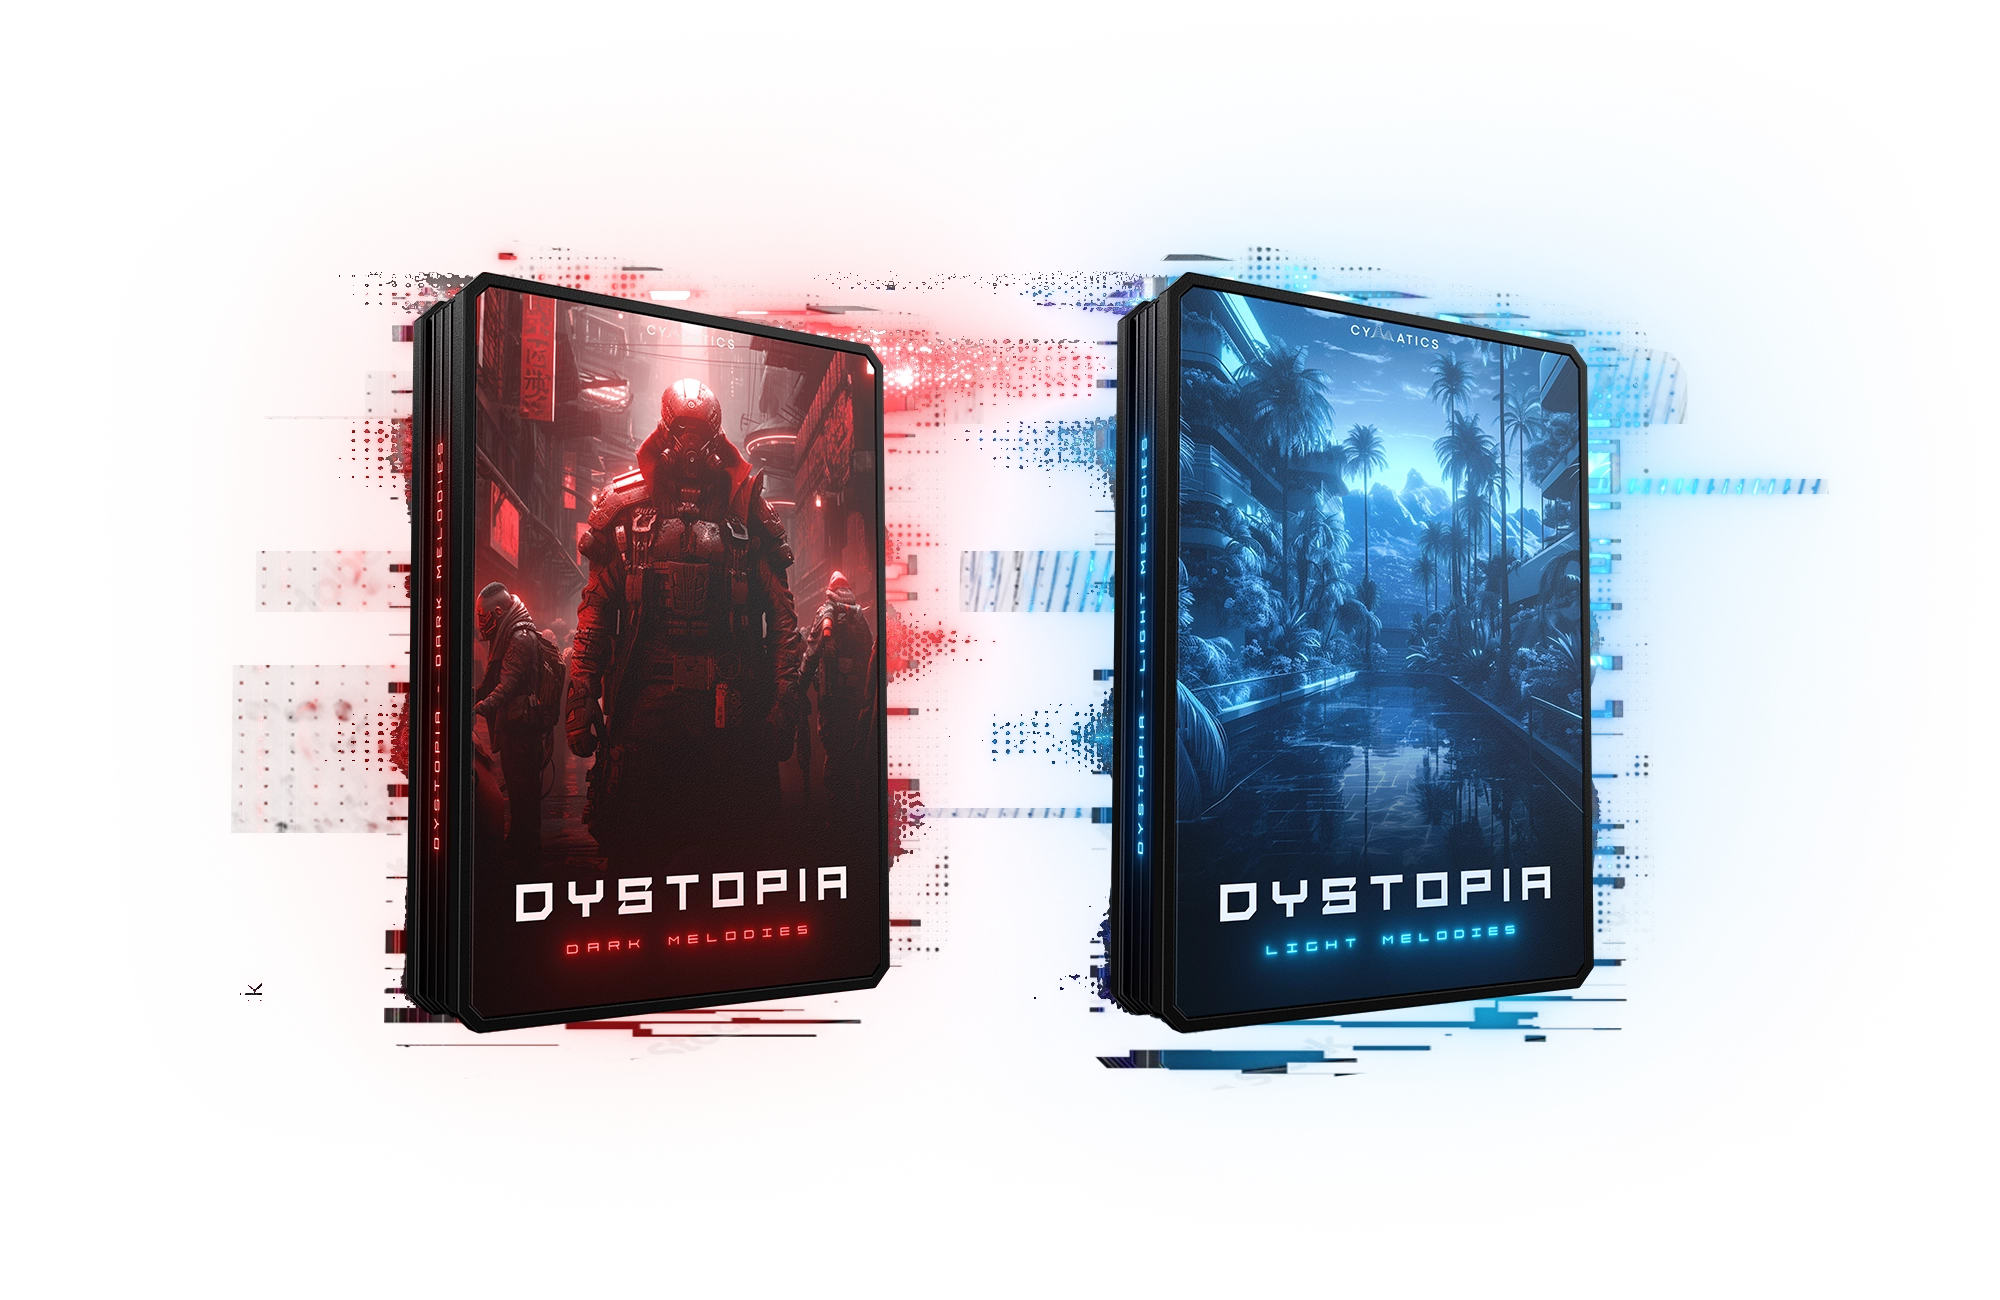 Dystopia Launch Edition